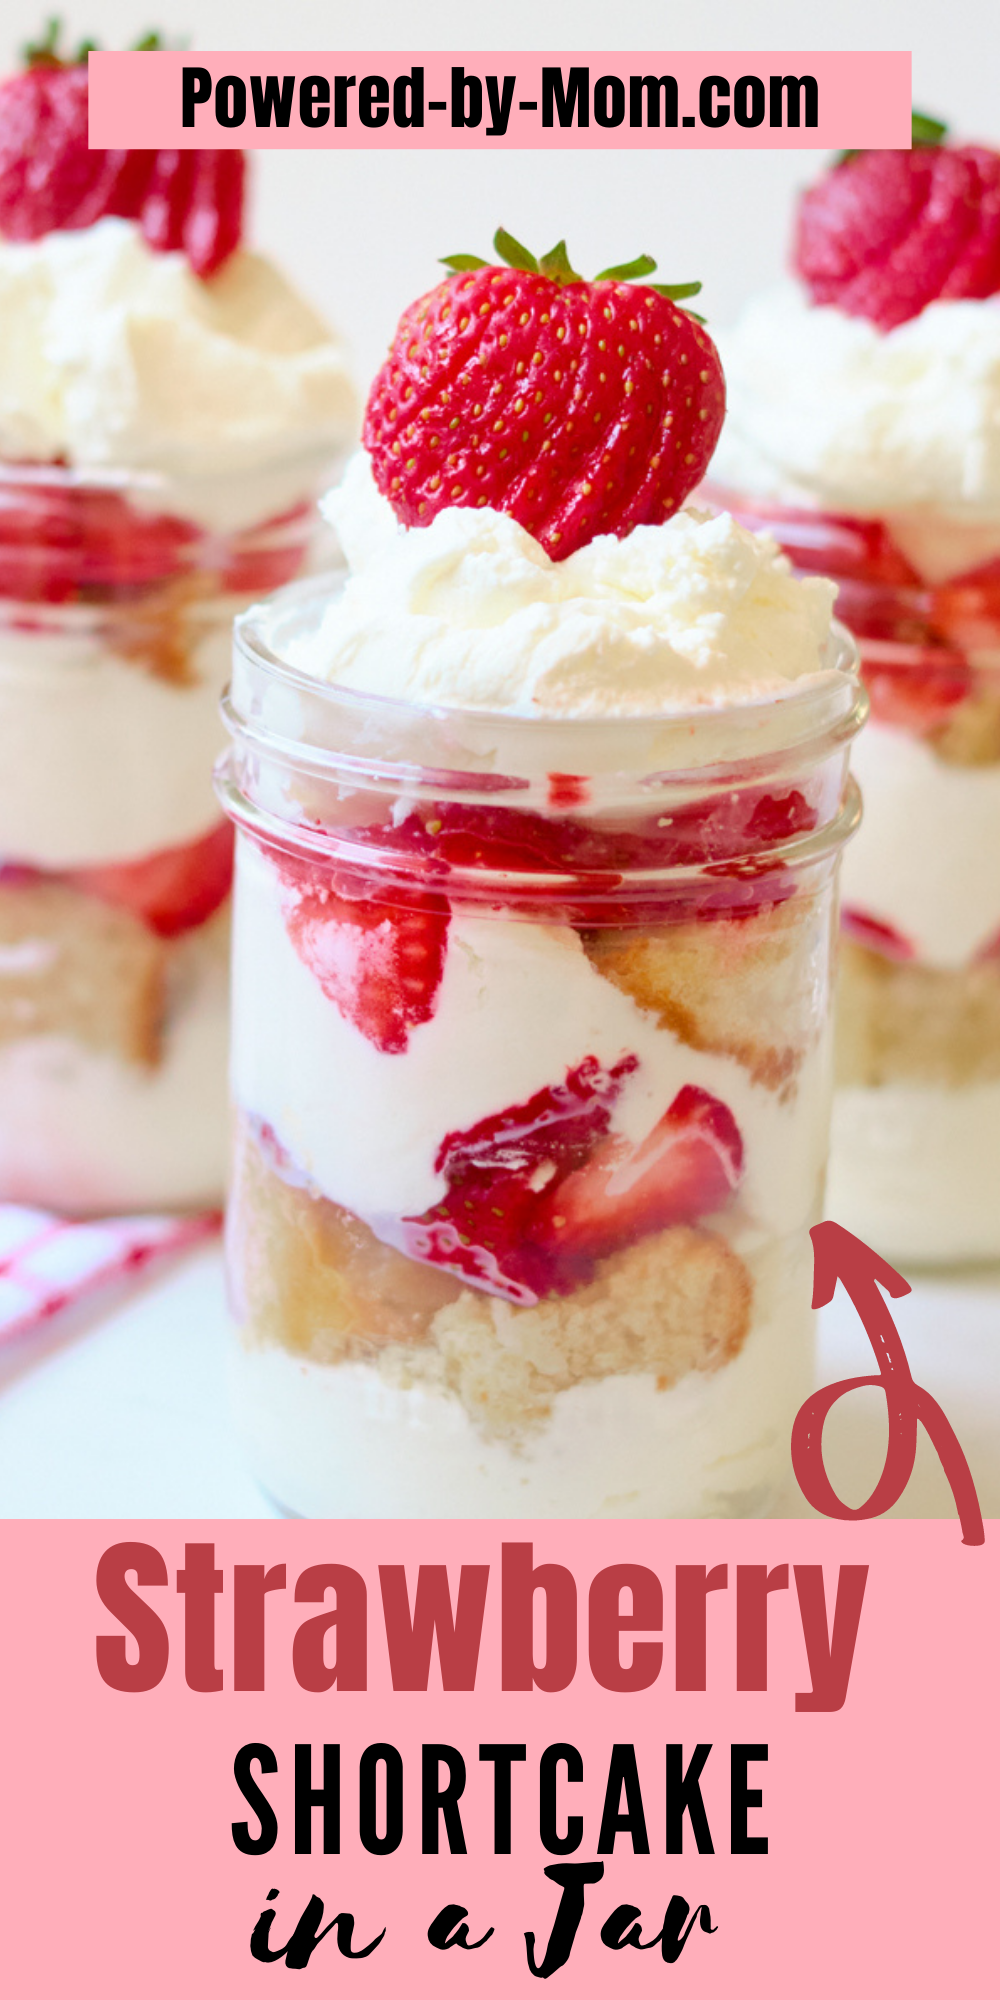 This Strawberry Shortcake in a Jar recipe has all the delicious flavours of a classic strawberry shortcake but with scrumptious cake layers instead of a flaky biscuit.